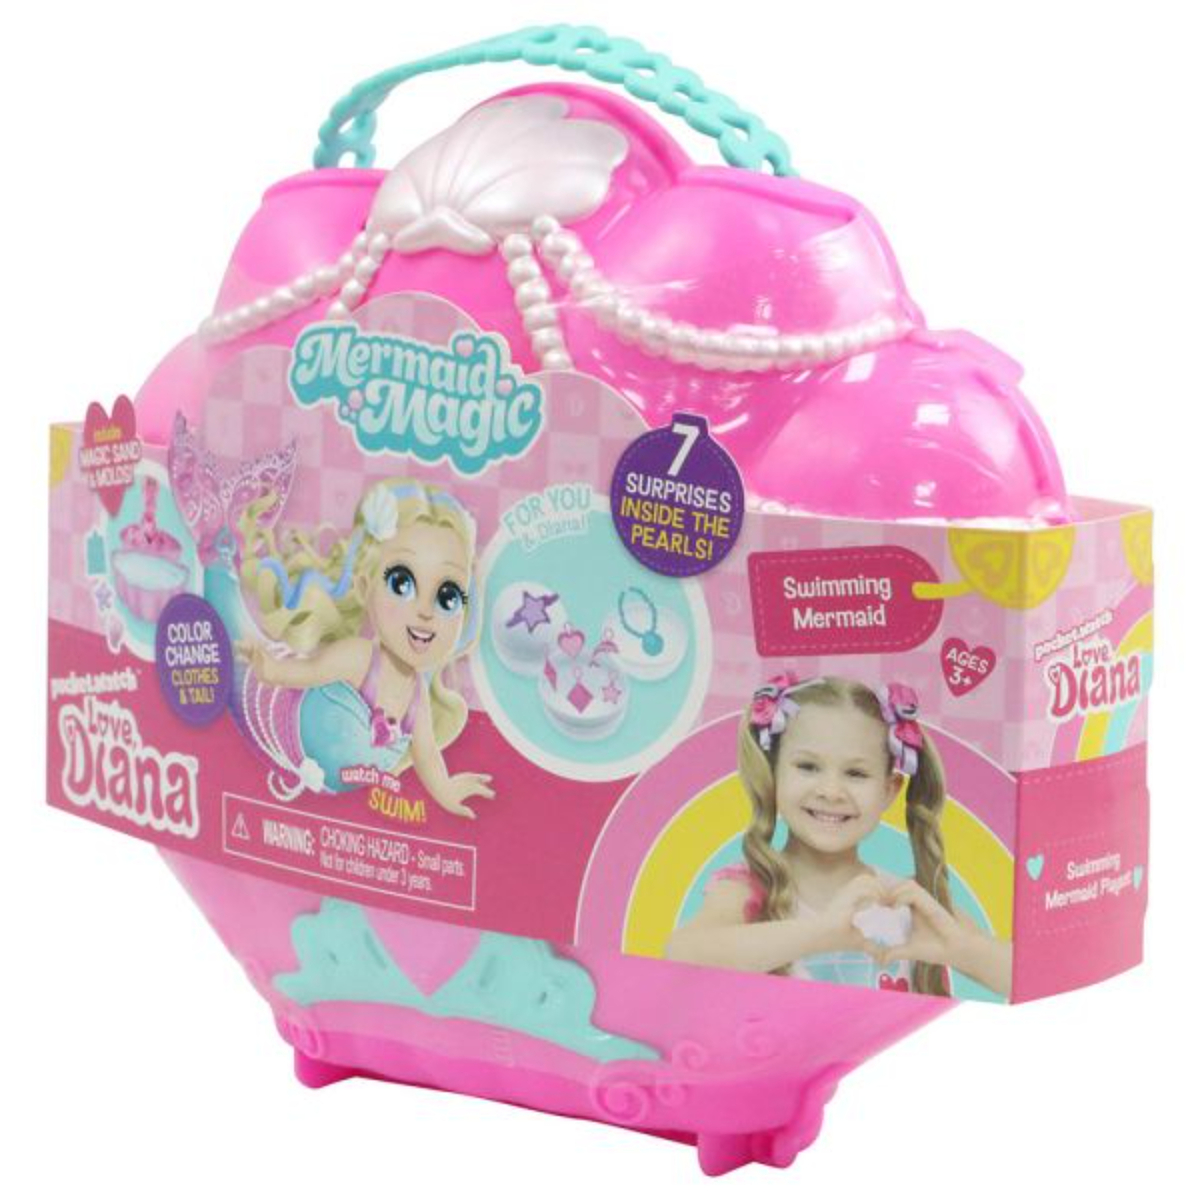 Love Diana  Mermaid Surprise Playset, 6 inches, Pink, 20911